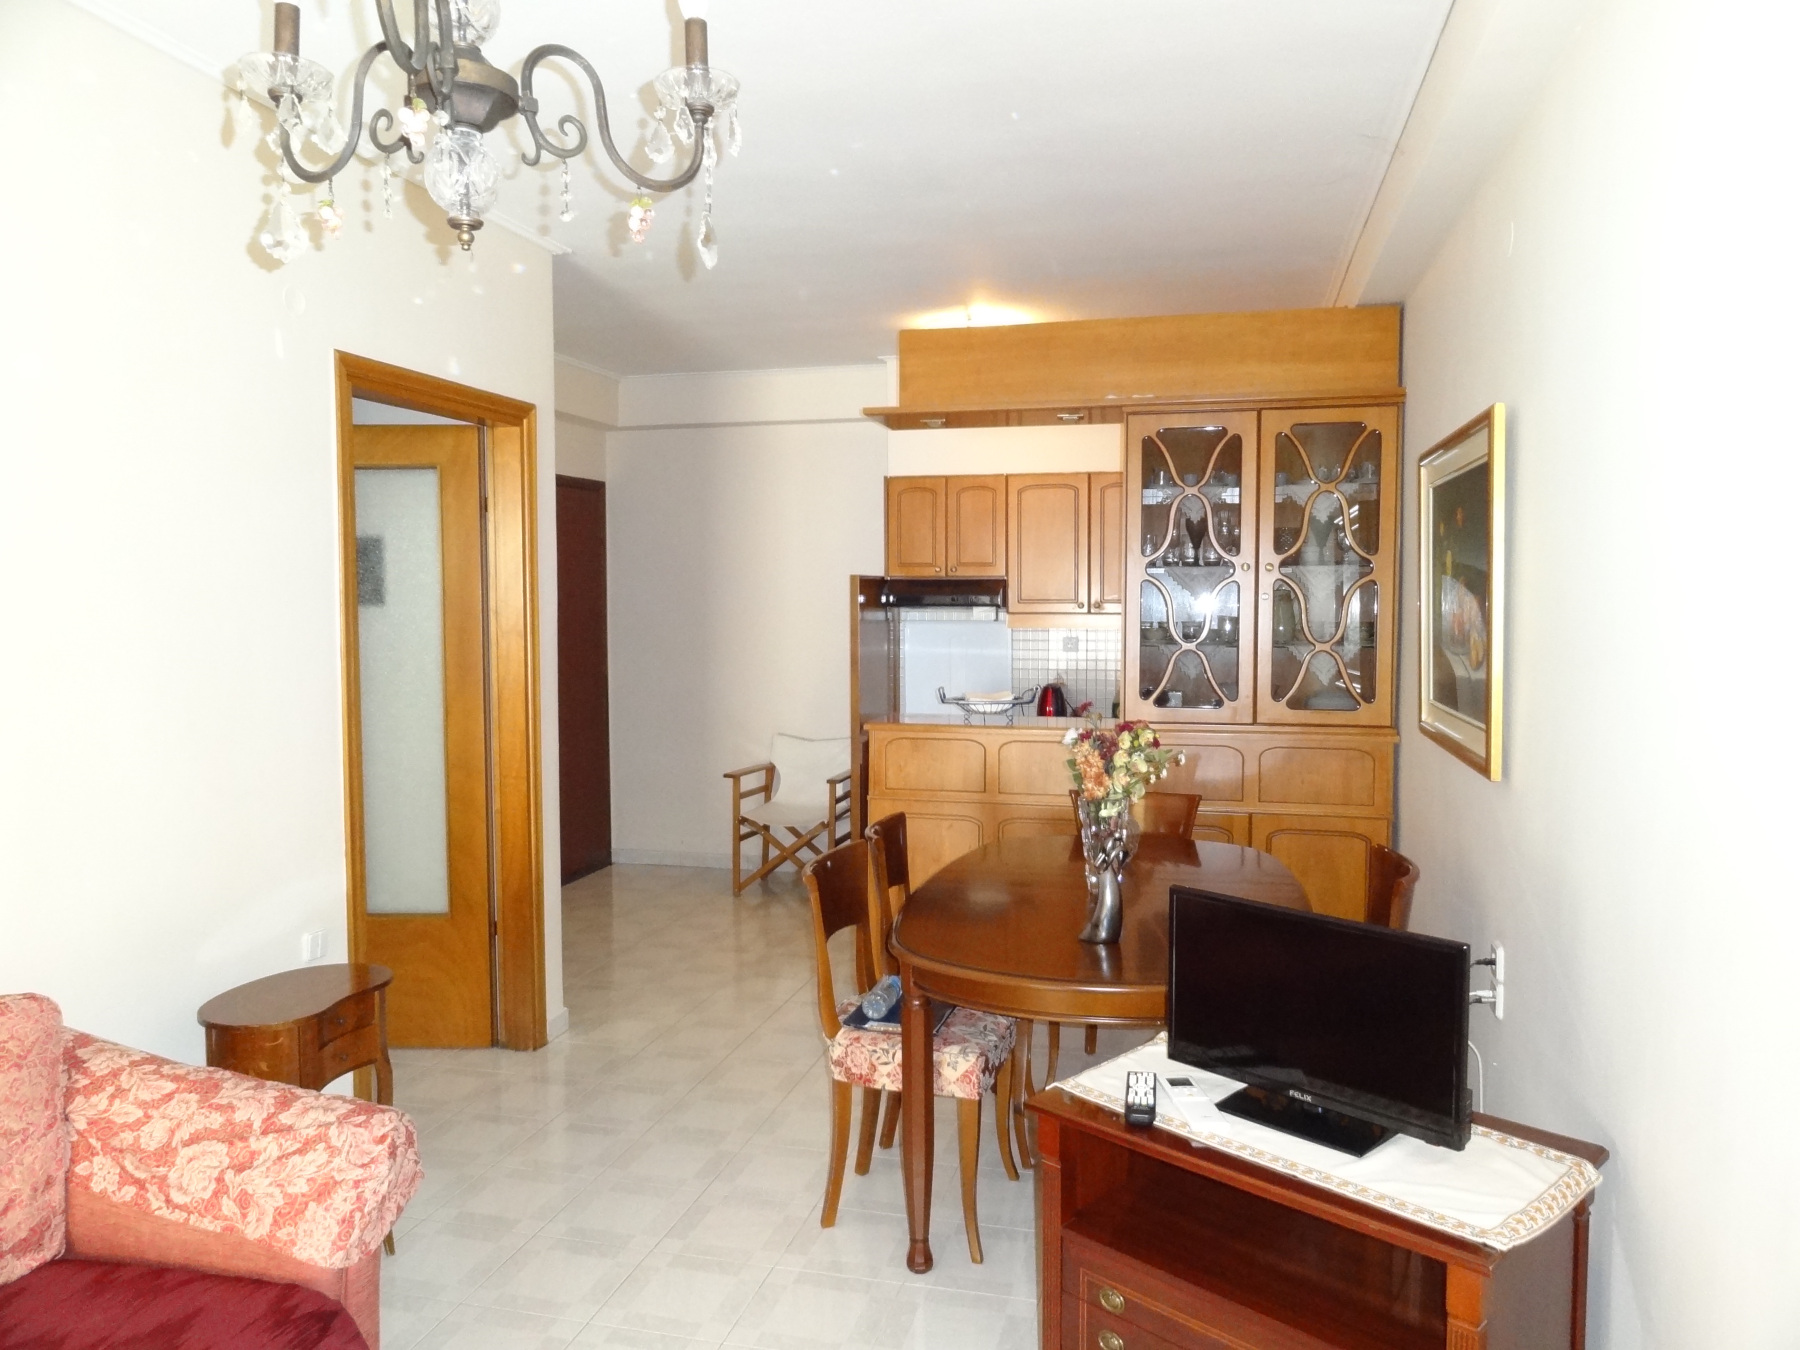 Furnished and equipped 1 bedroom apartment of 50 sq.m. for rent. 1st floor in the most central part of Ioannina